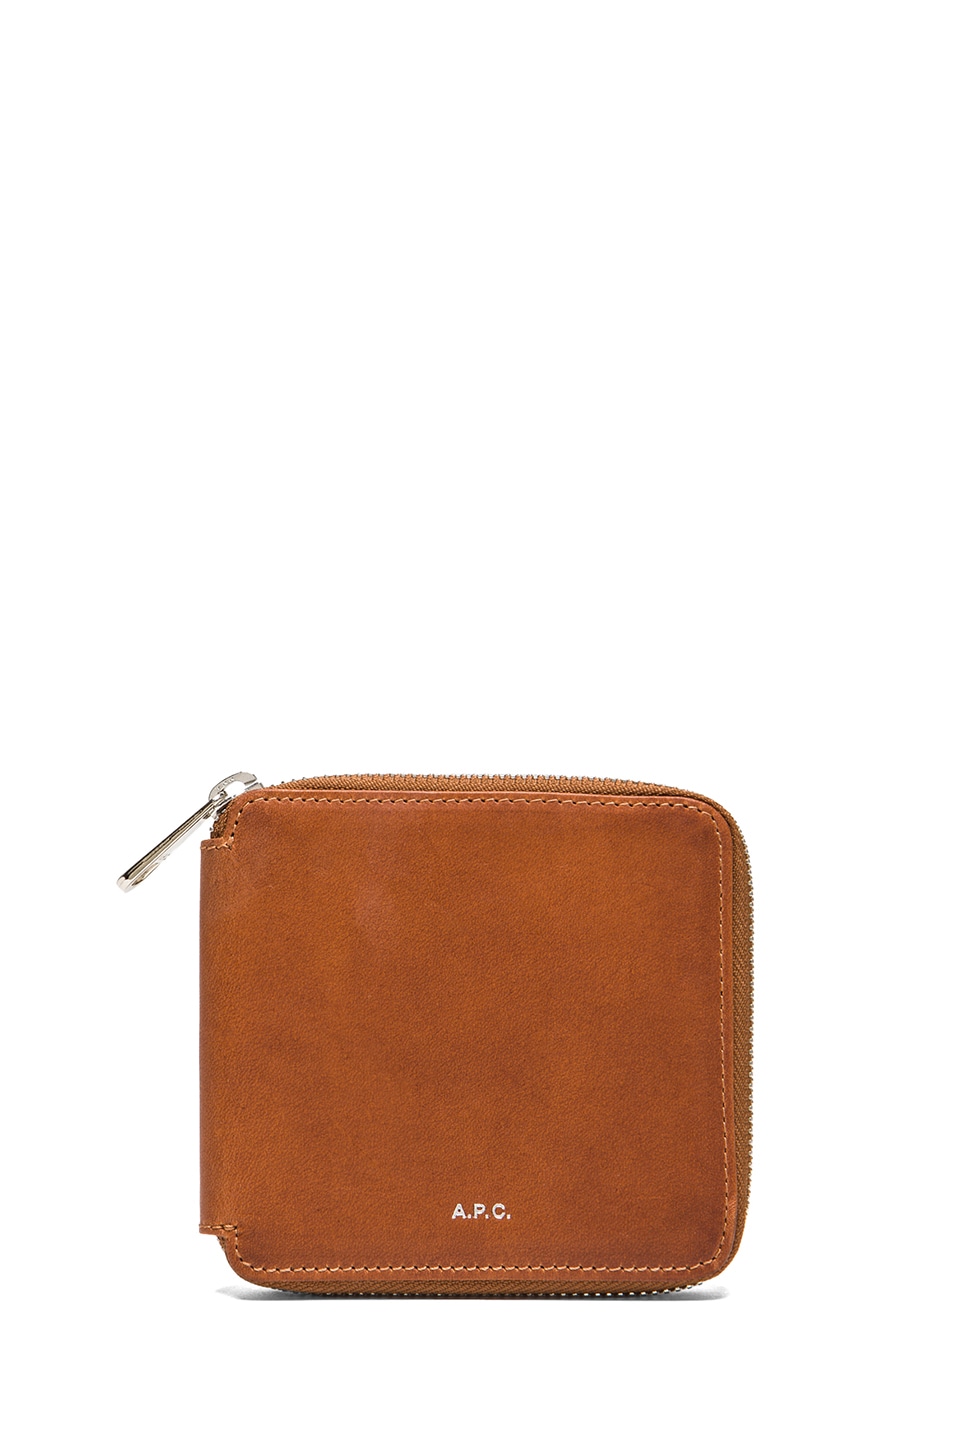 Image 1 of A.P.C. Compact Wallet in Noisette